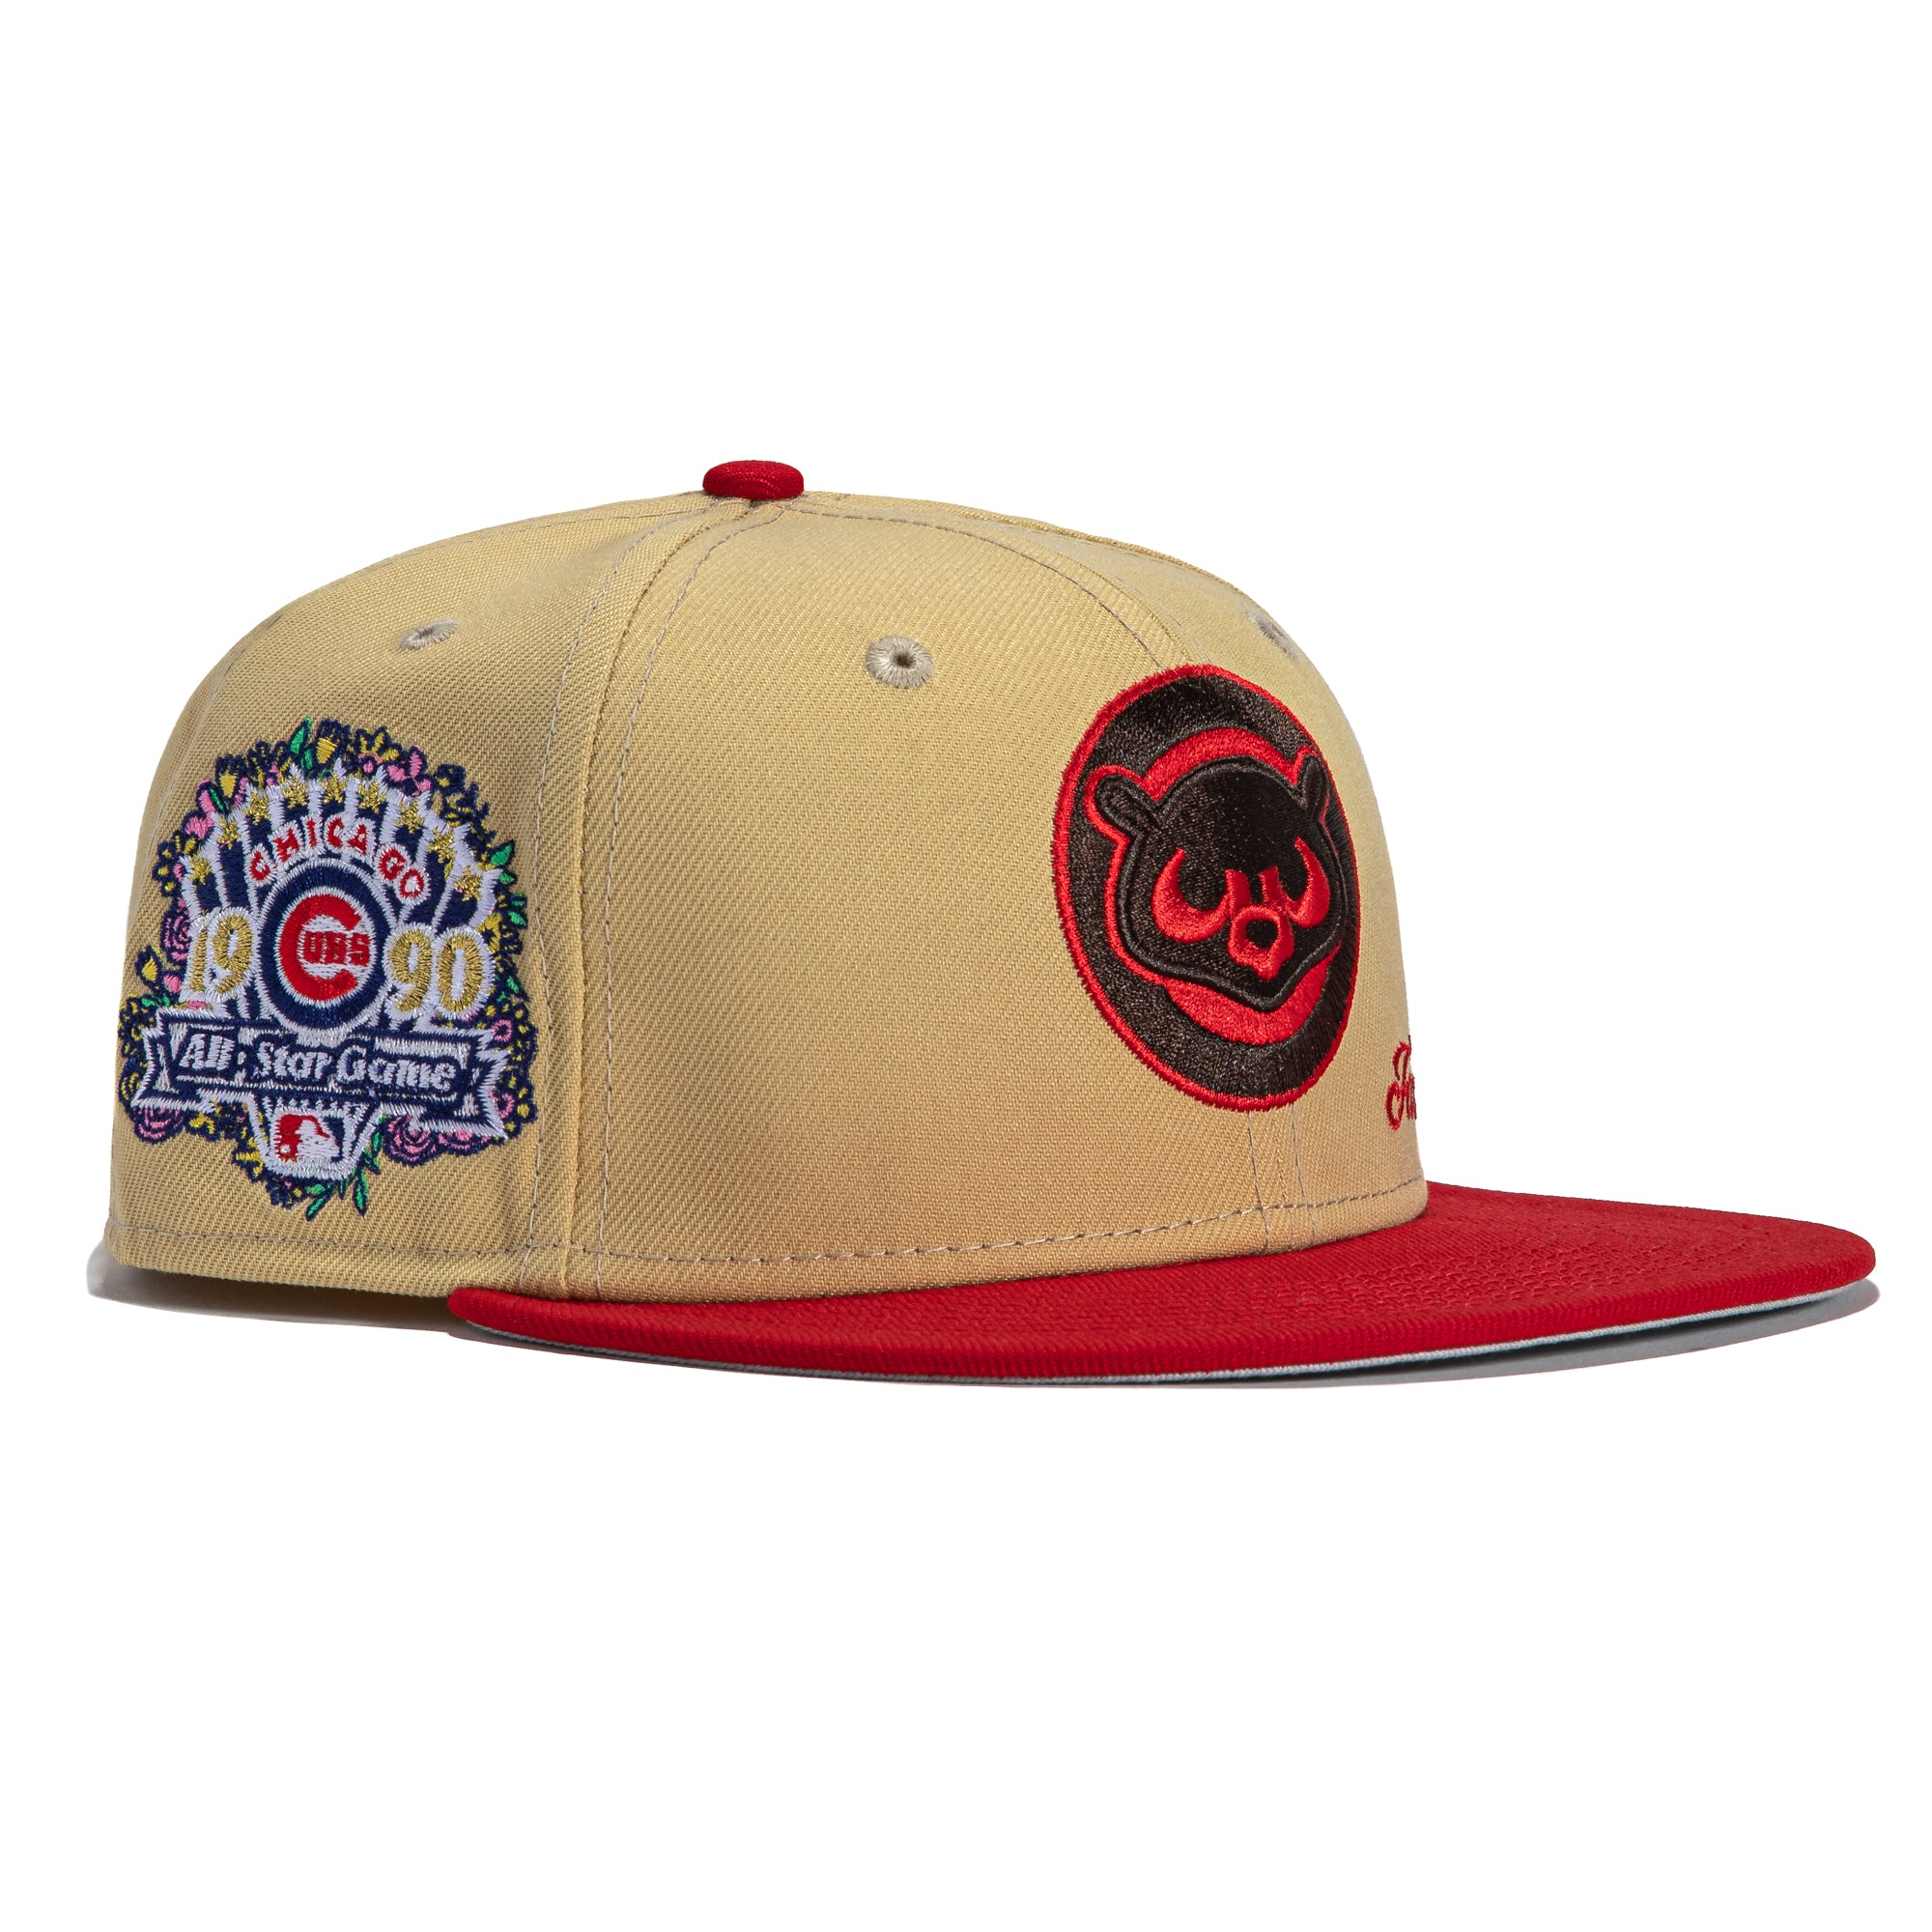 New Era 9Forty The League Game Cap - Chicago Cubs/Blue - New Star